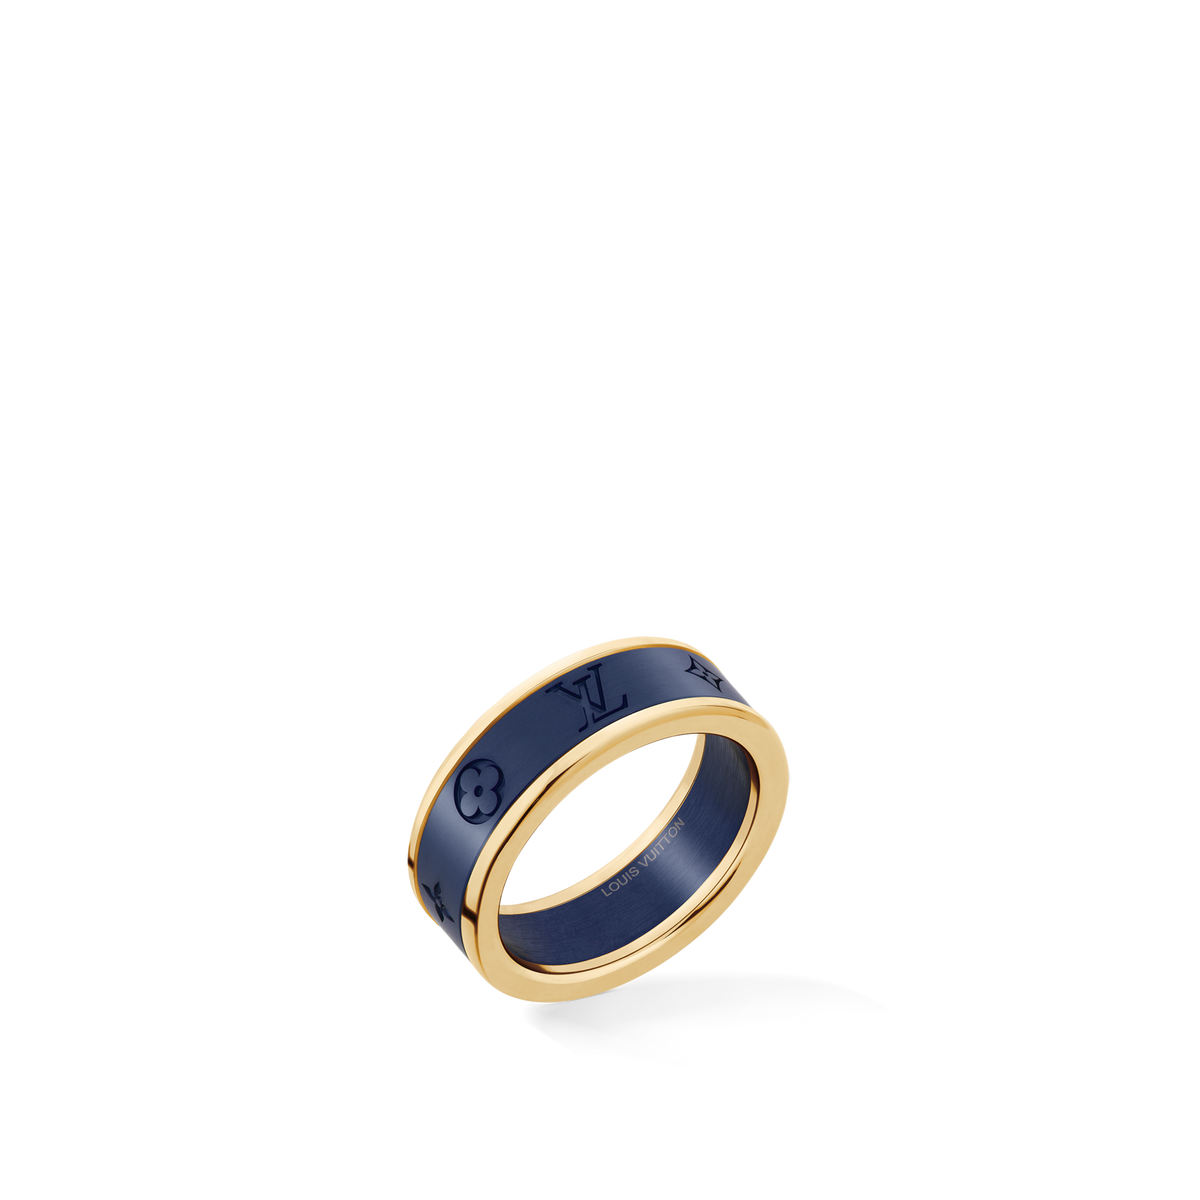 Les Gastons Vuitton Small Ring, Yellow Gold and Titanium